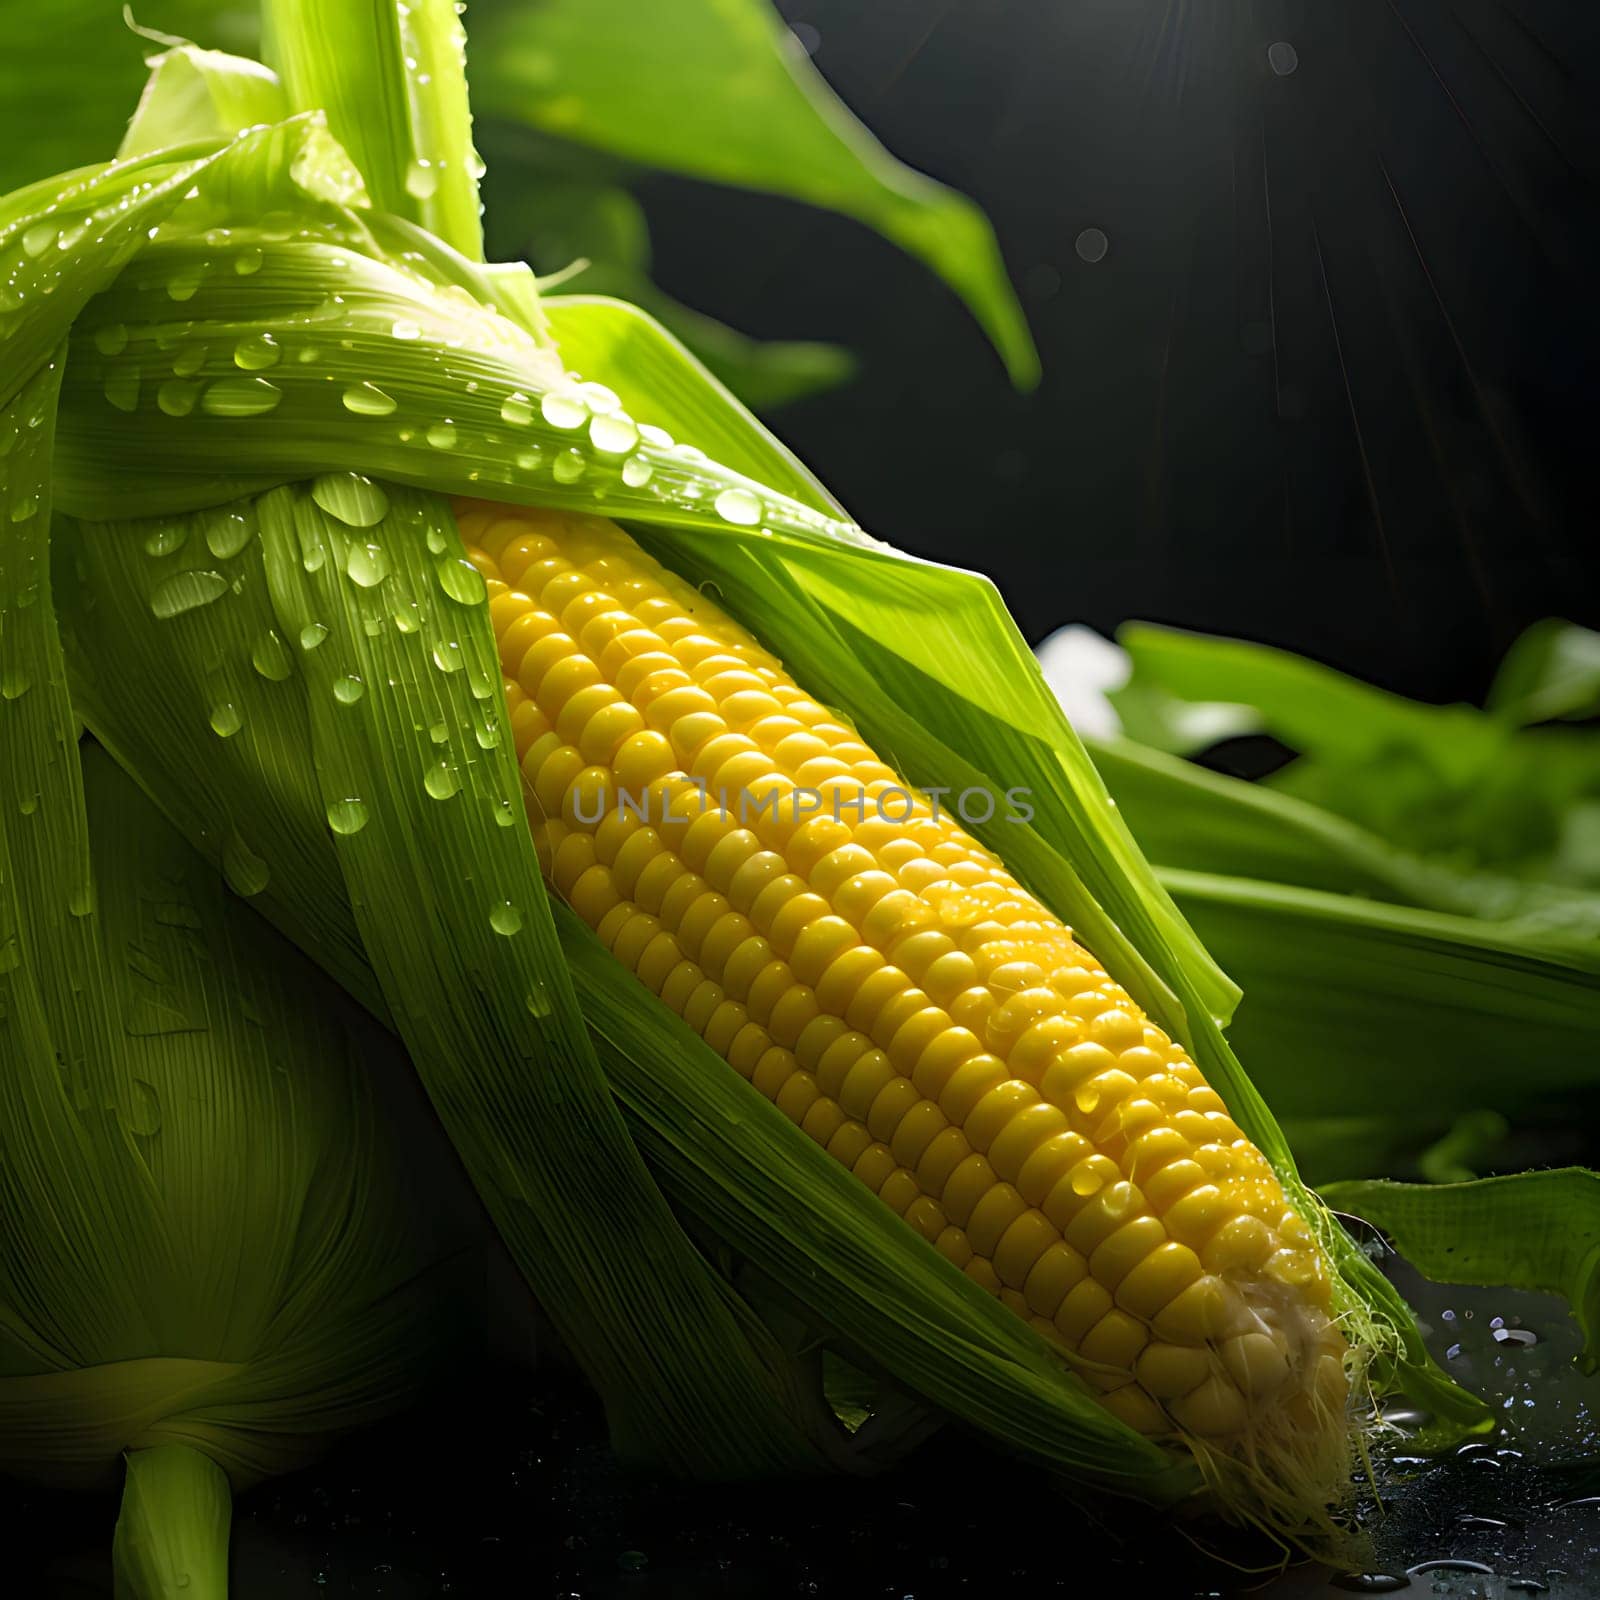 Yellow corn cob in Green Leaf, raindrops of water. Corn as a dish of thanksgiving for the harvest. An atmosphere of joy and celebration.